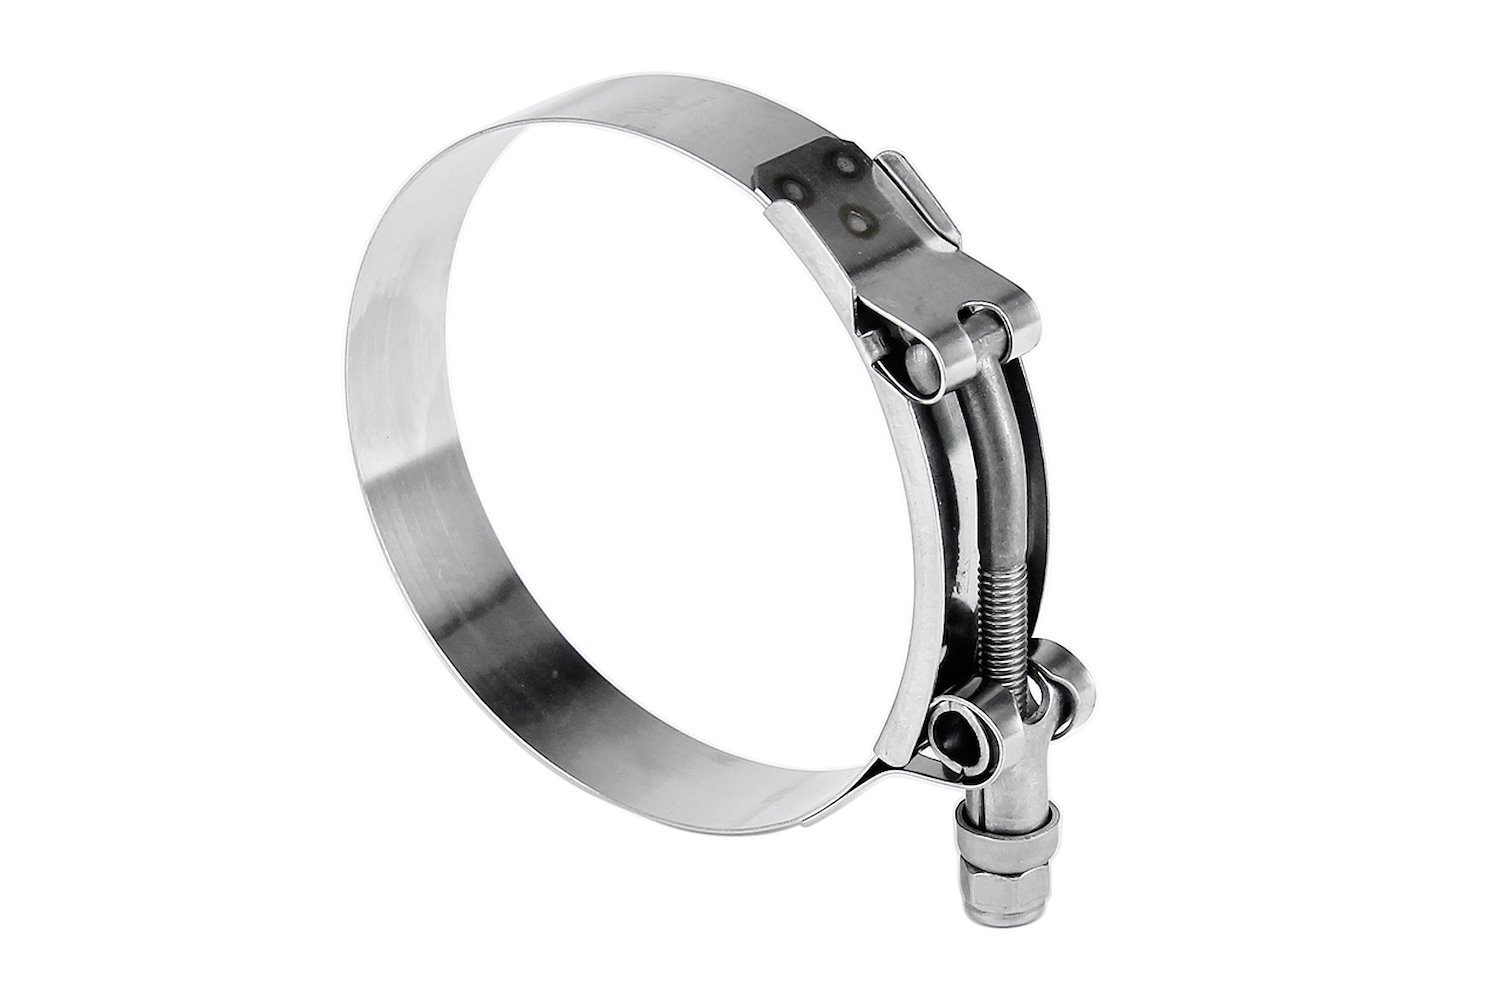 316-SSTC-127-135 100-Percent Marine Grade Stainless Steel T-Bolt Hose Clamp, Size #132, Range: 5 in.- 5.31 in.